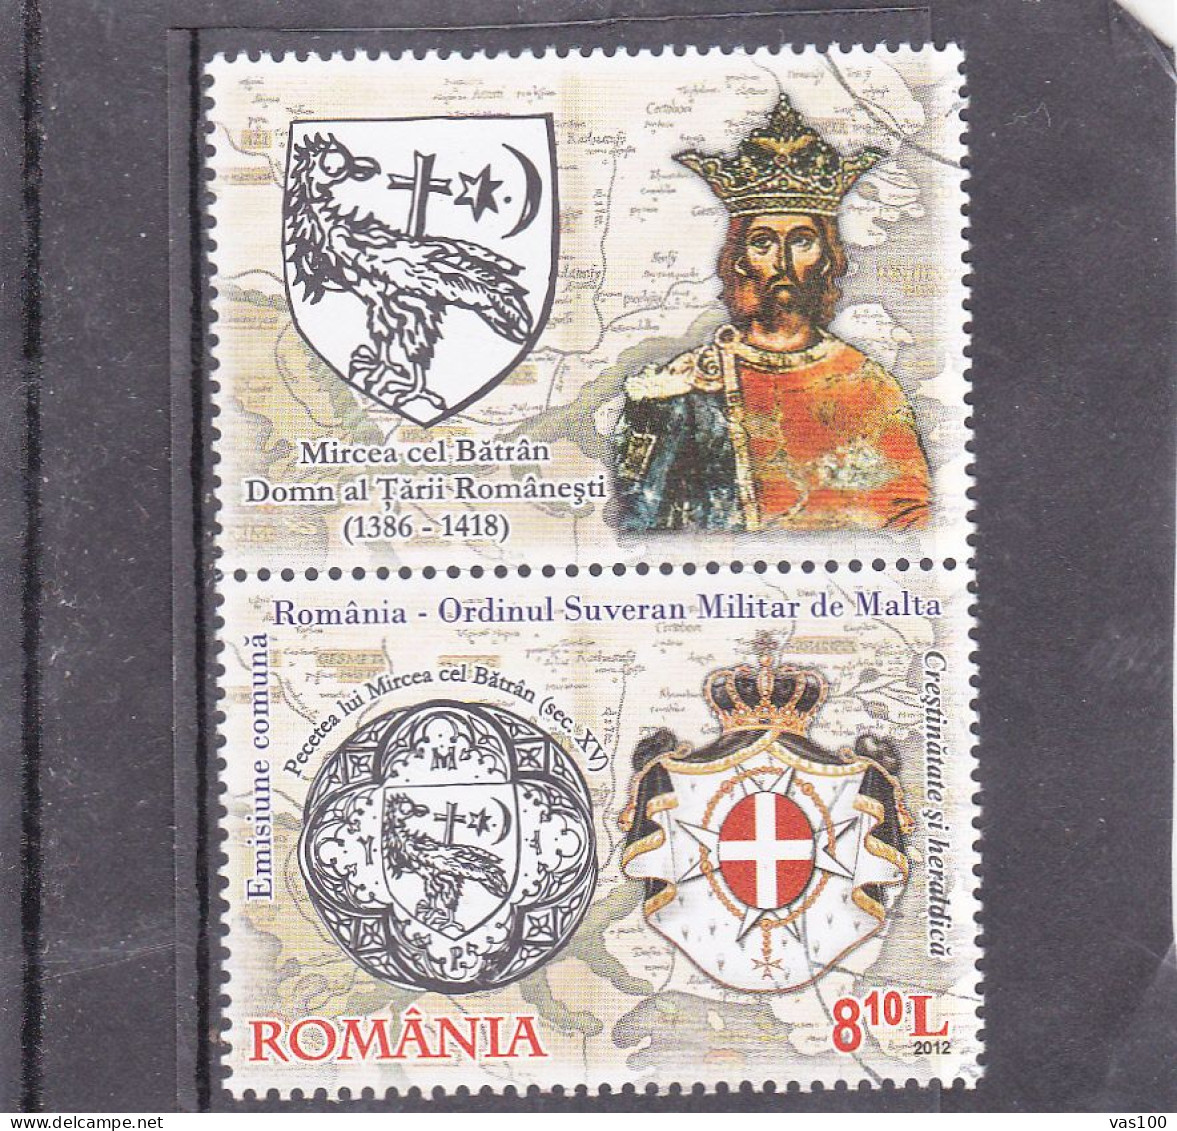 ROMANIA 2012 Relations With Sovereign Maltese Order USED + LABELS. Michel 6667 - Oblitérés